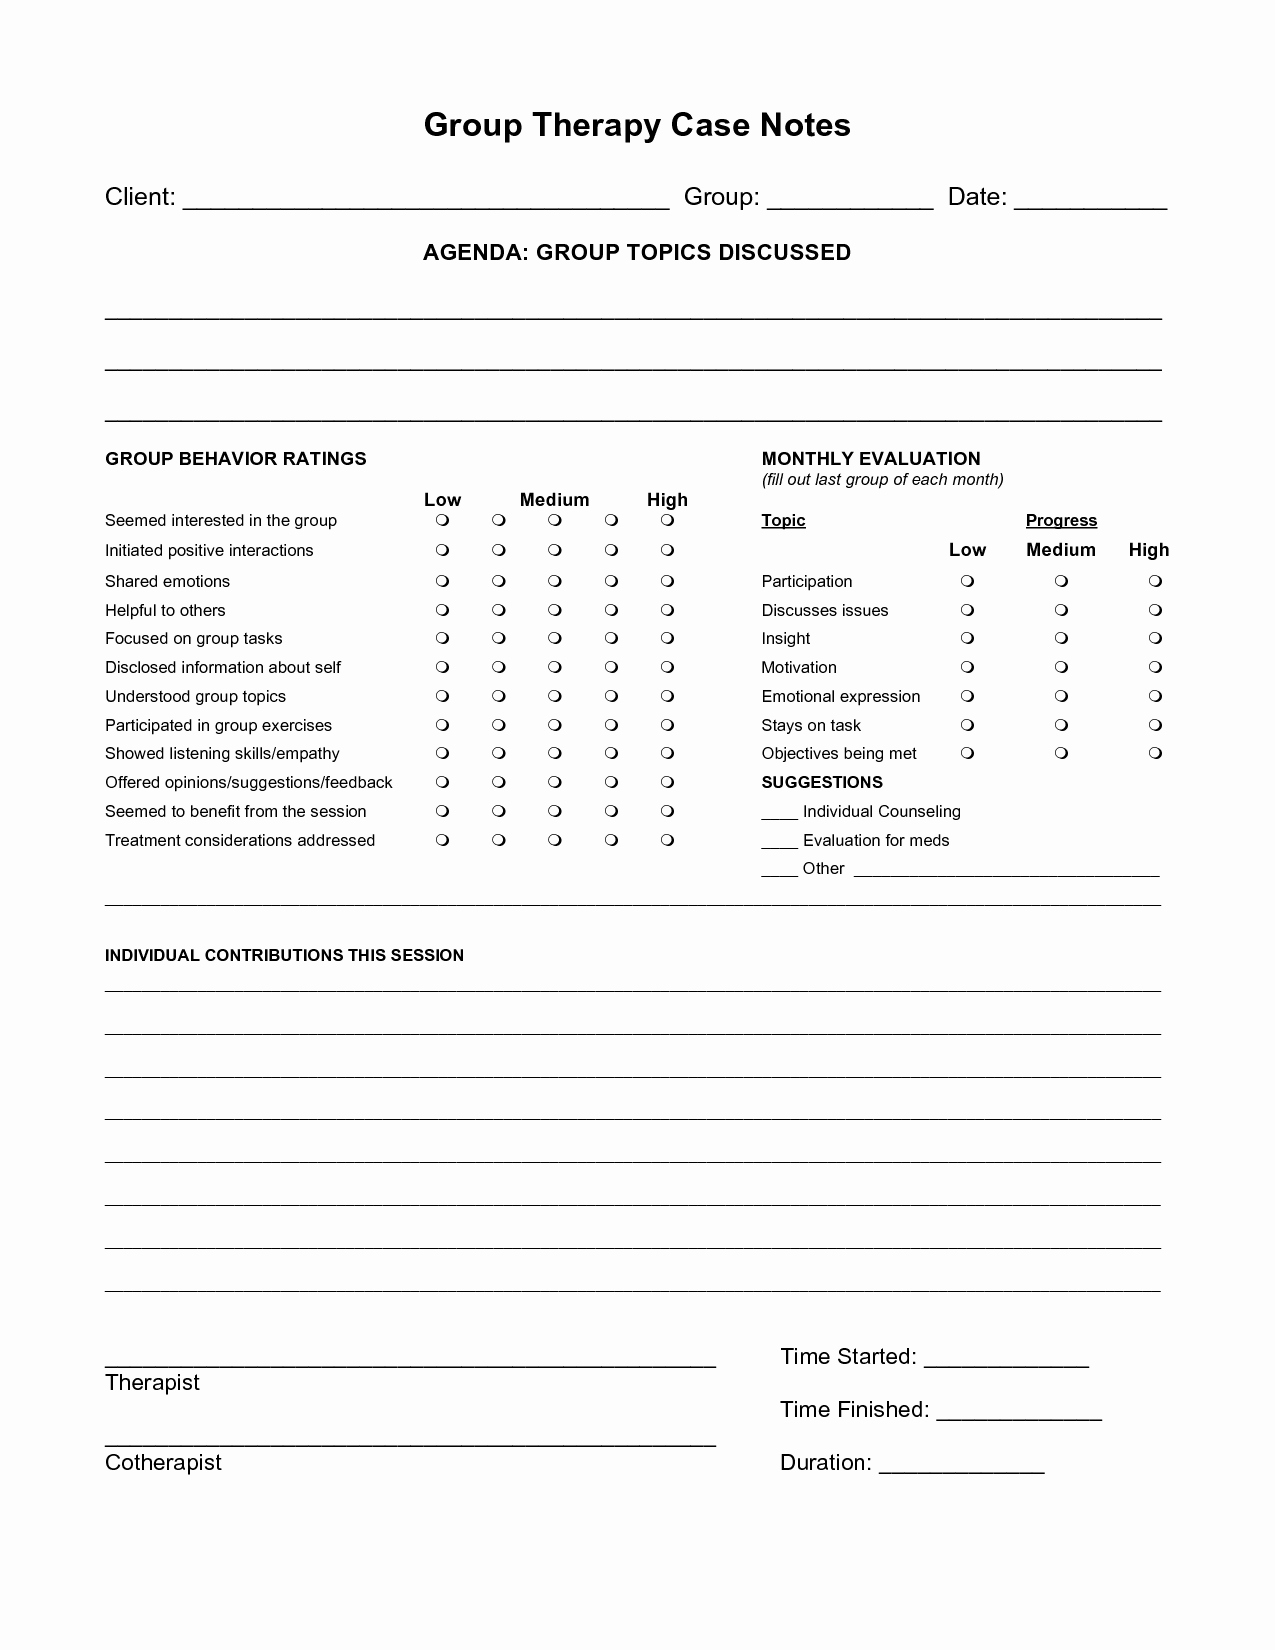 Case Management Notes Template Luxury Free Case Note Templates Group therapy Case Notes